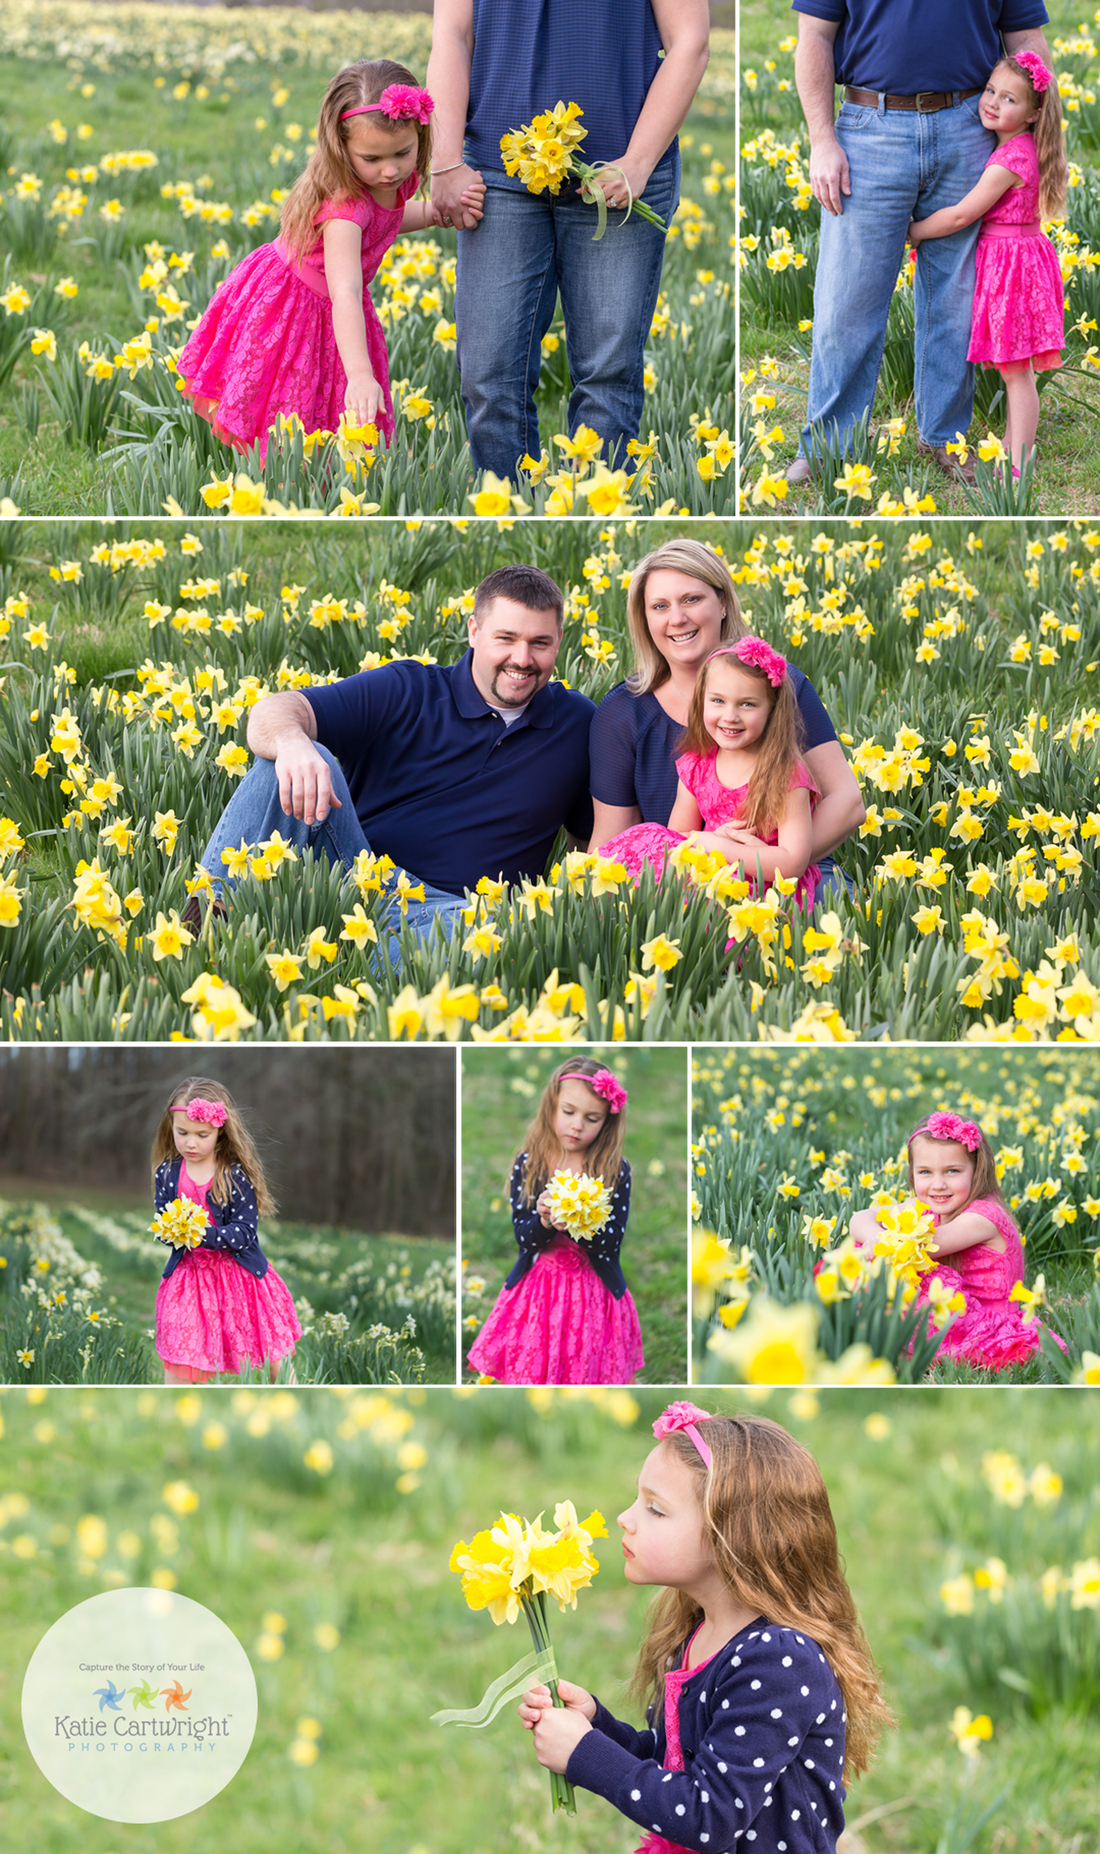 family portraits, field of flowers, jonquils, girl with flowers, pink blue, yellow, posing family of three